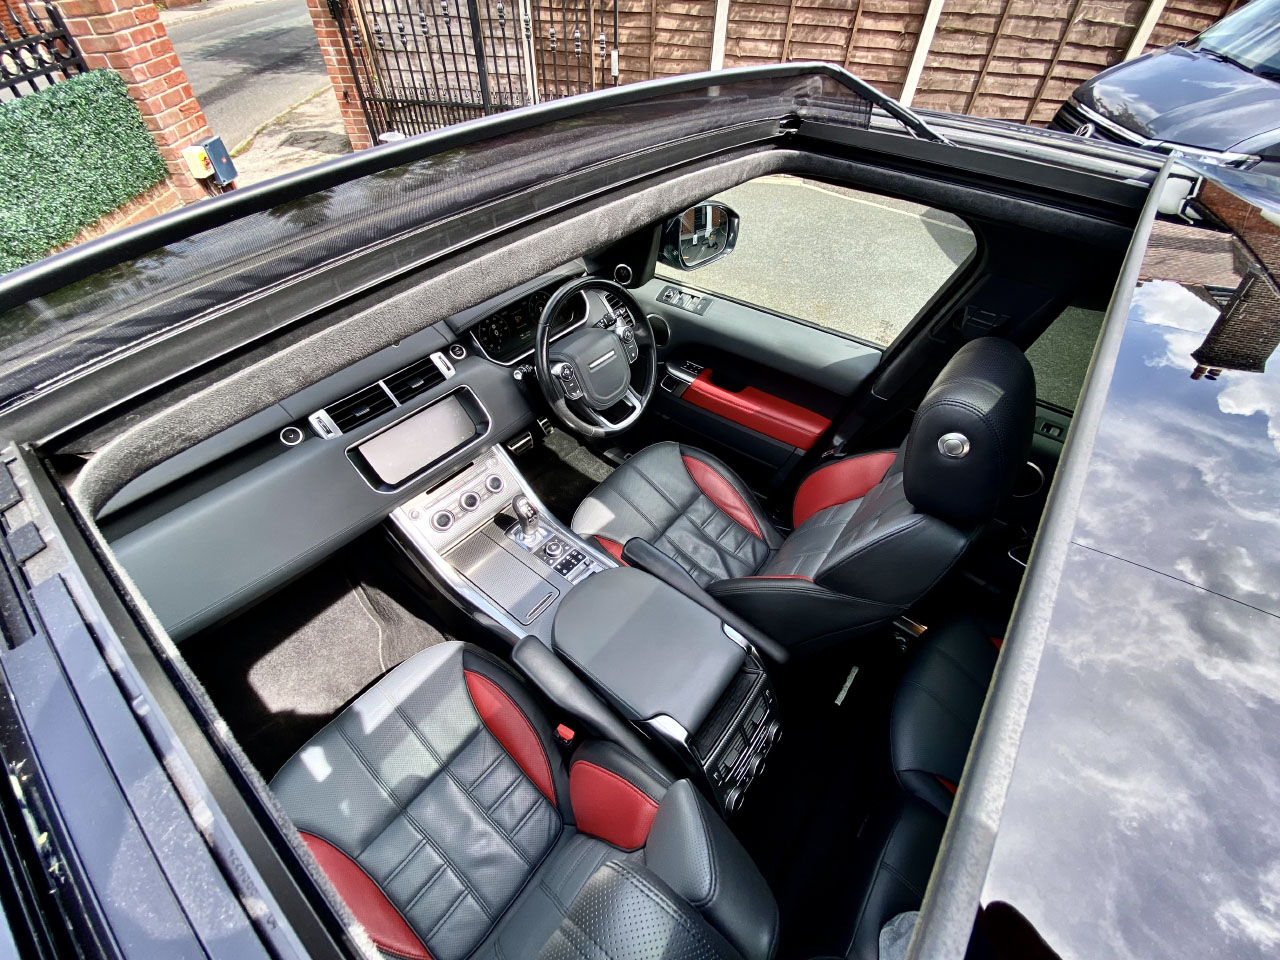 Completed interior car valet service viewed through sunroof of Range Rover